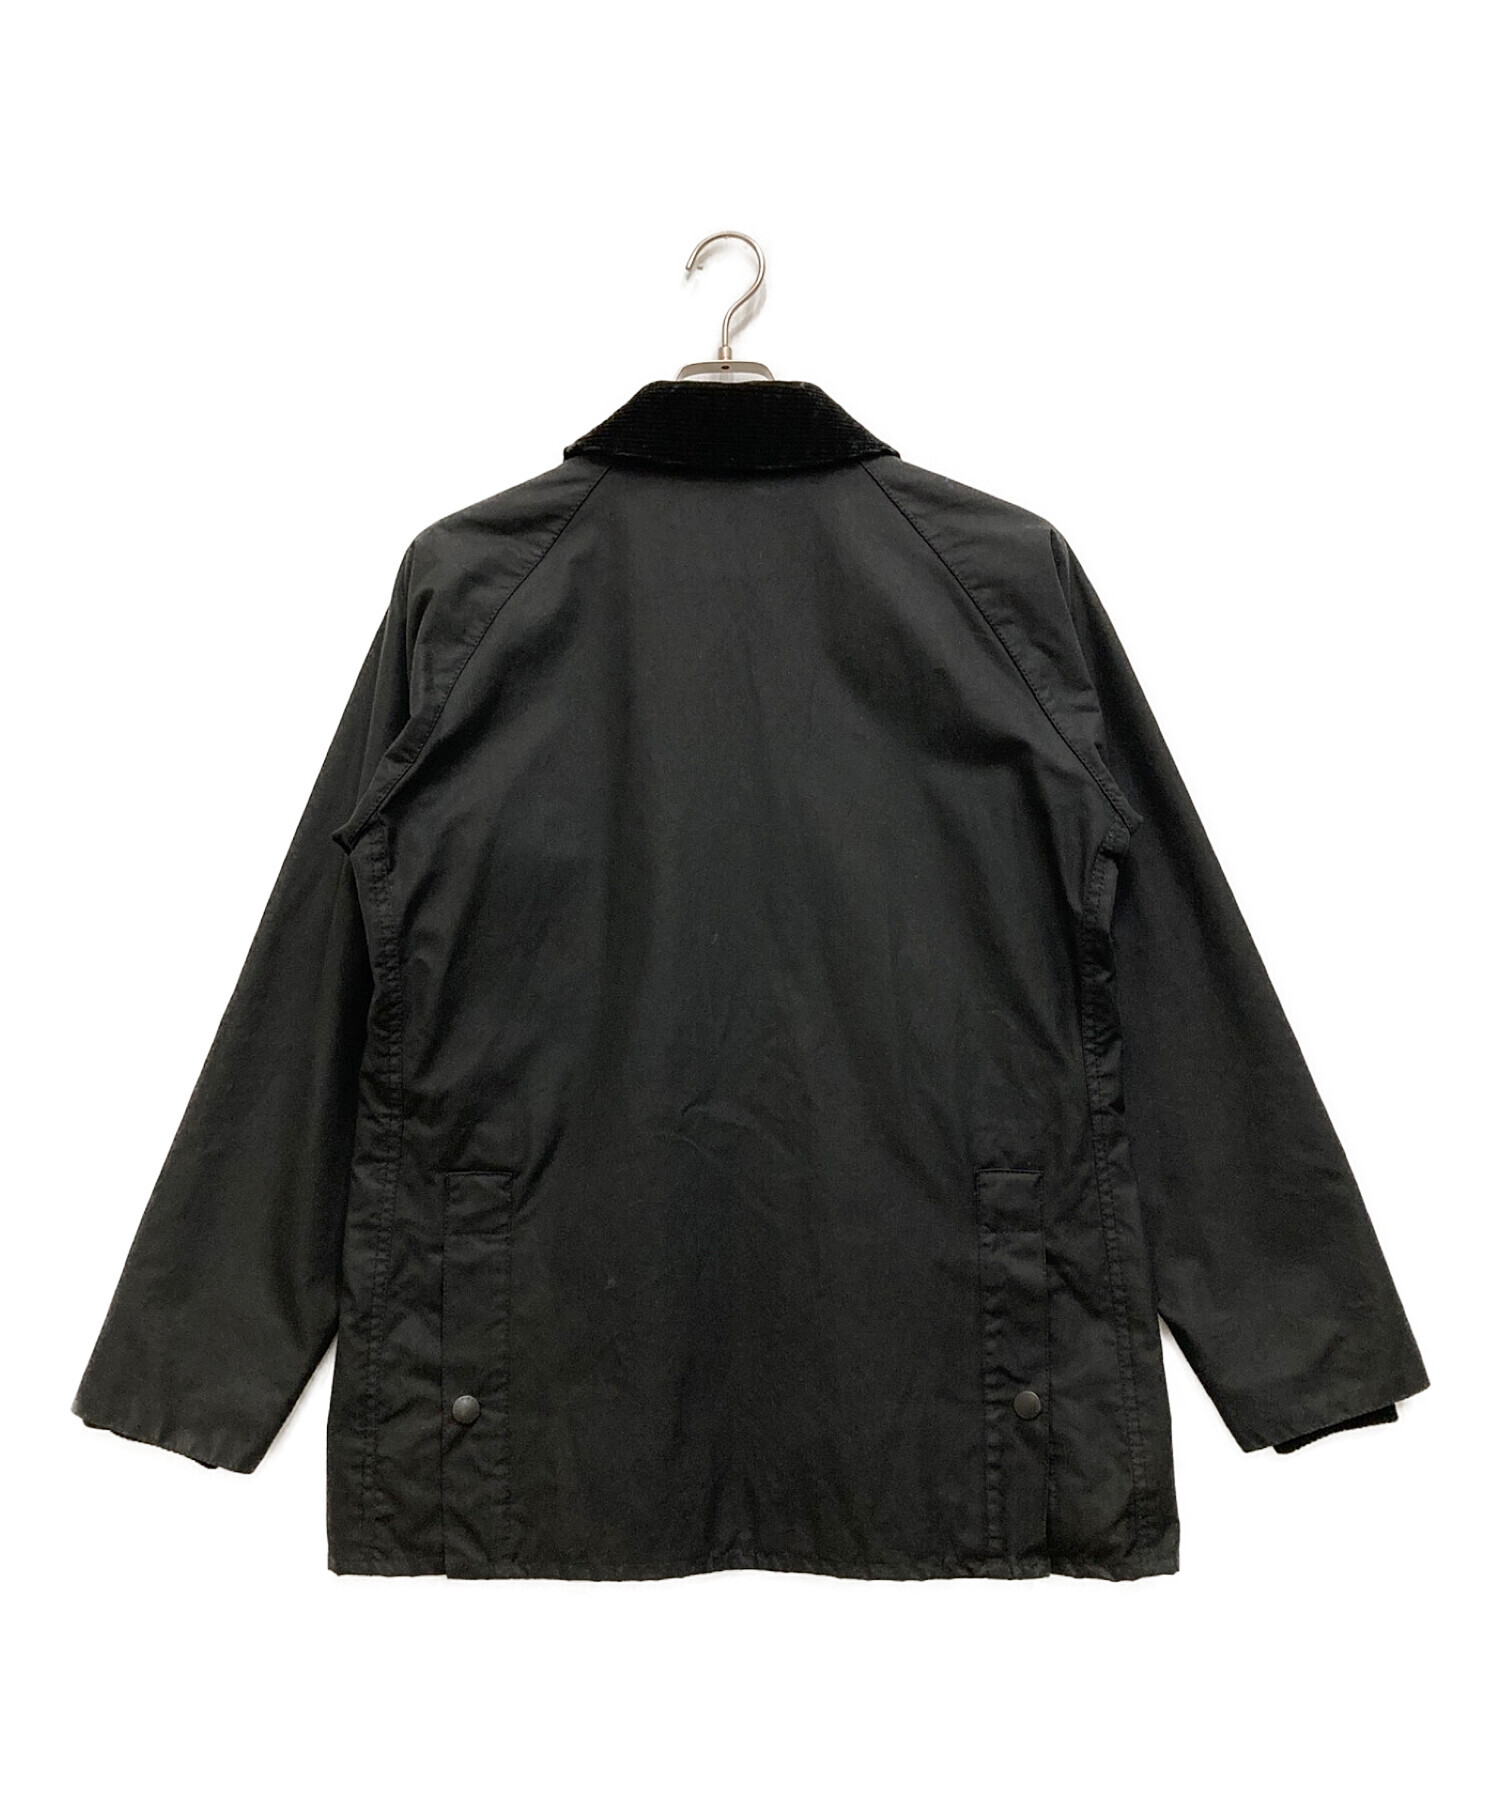 Barbour バブアー　SL BEDALE 38 ブラック着丈76